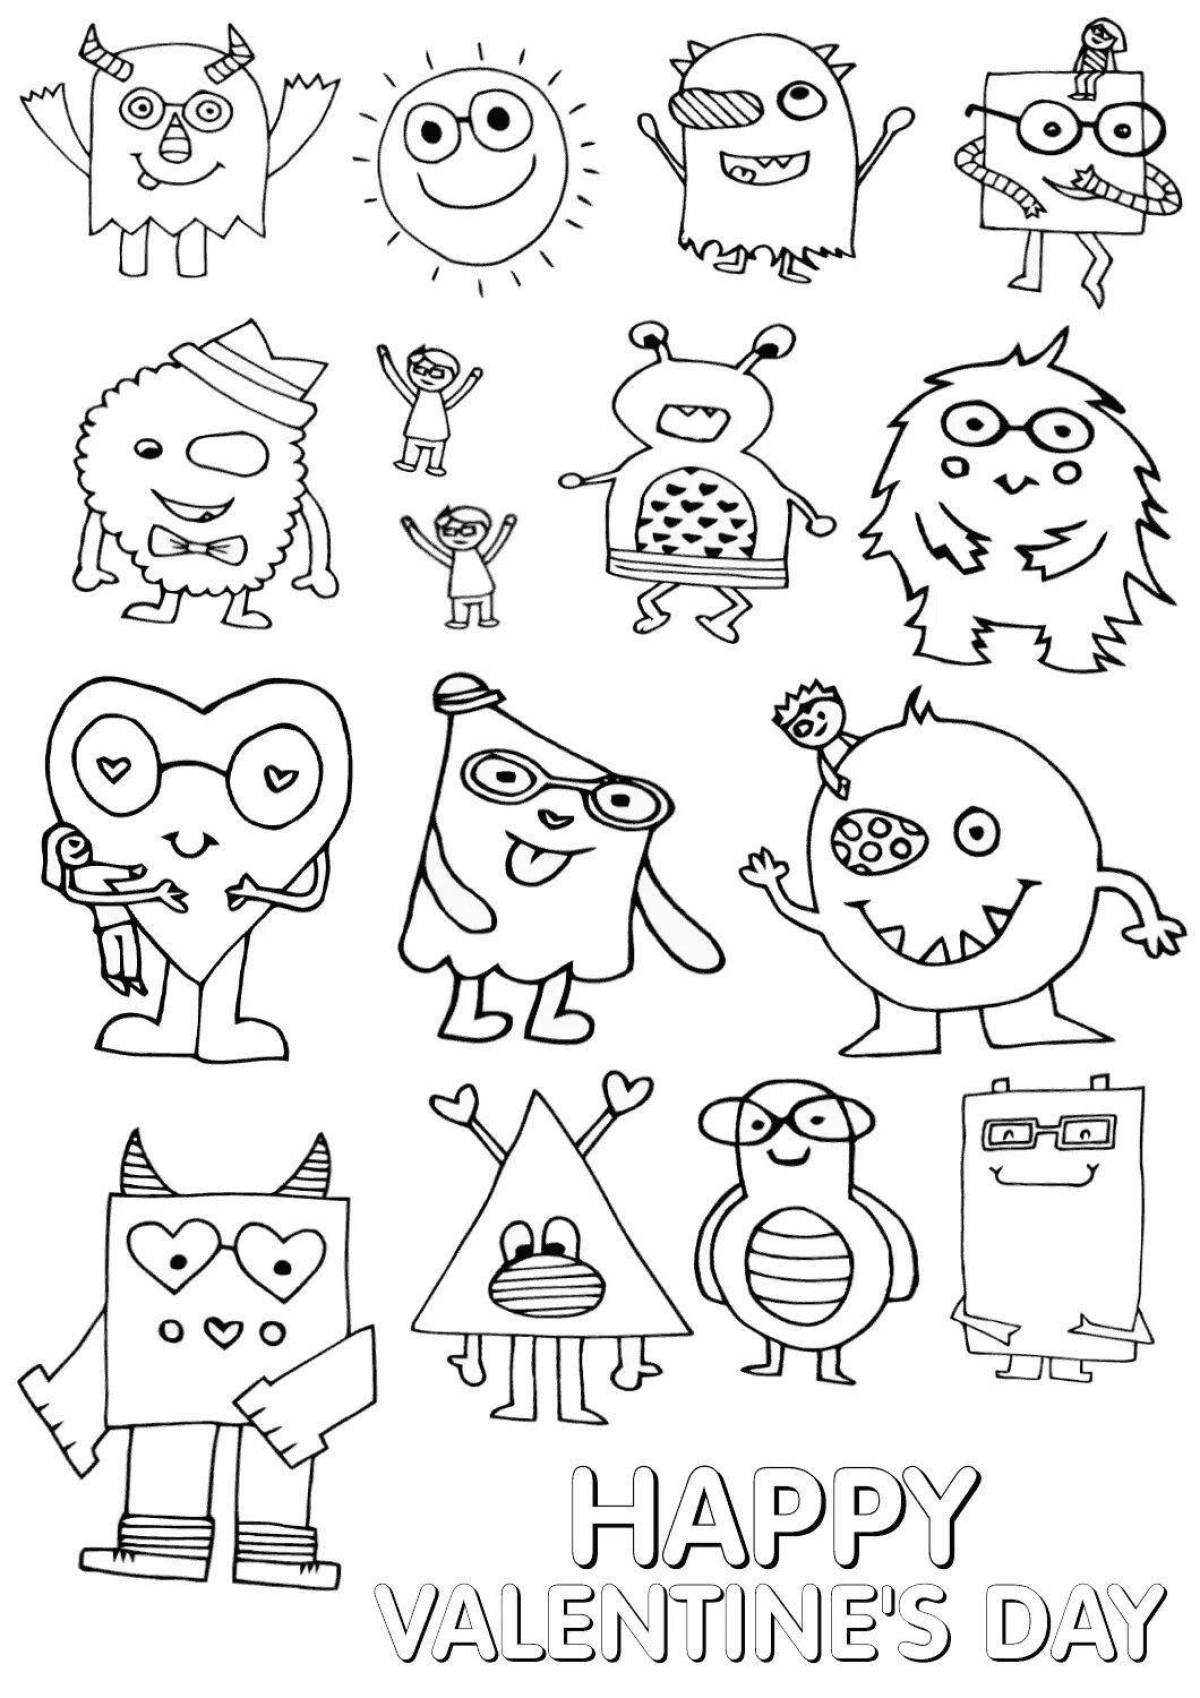 Creative coloring drawings for stickers